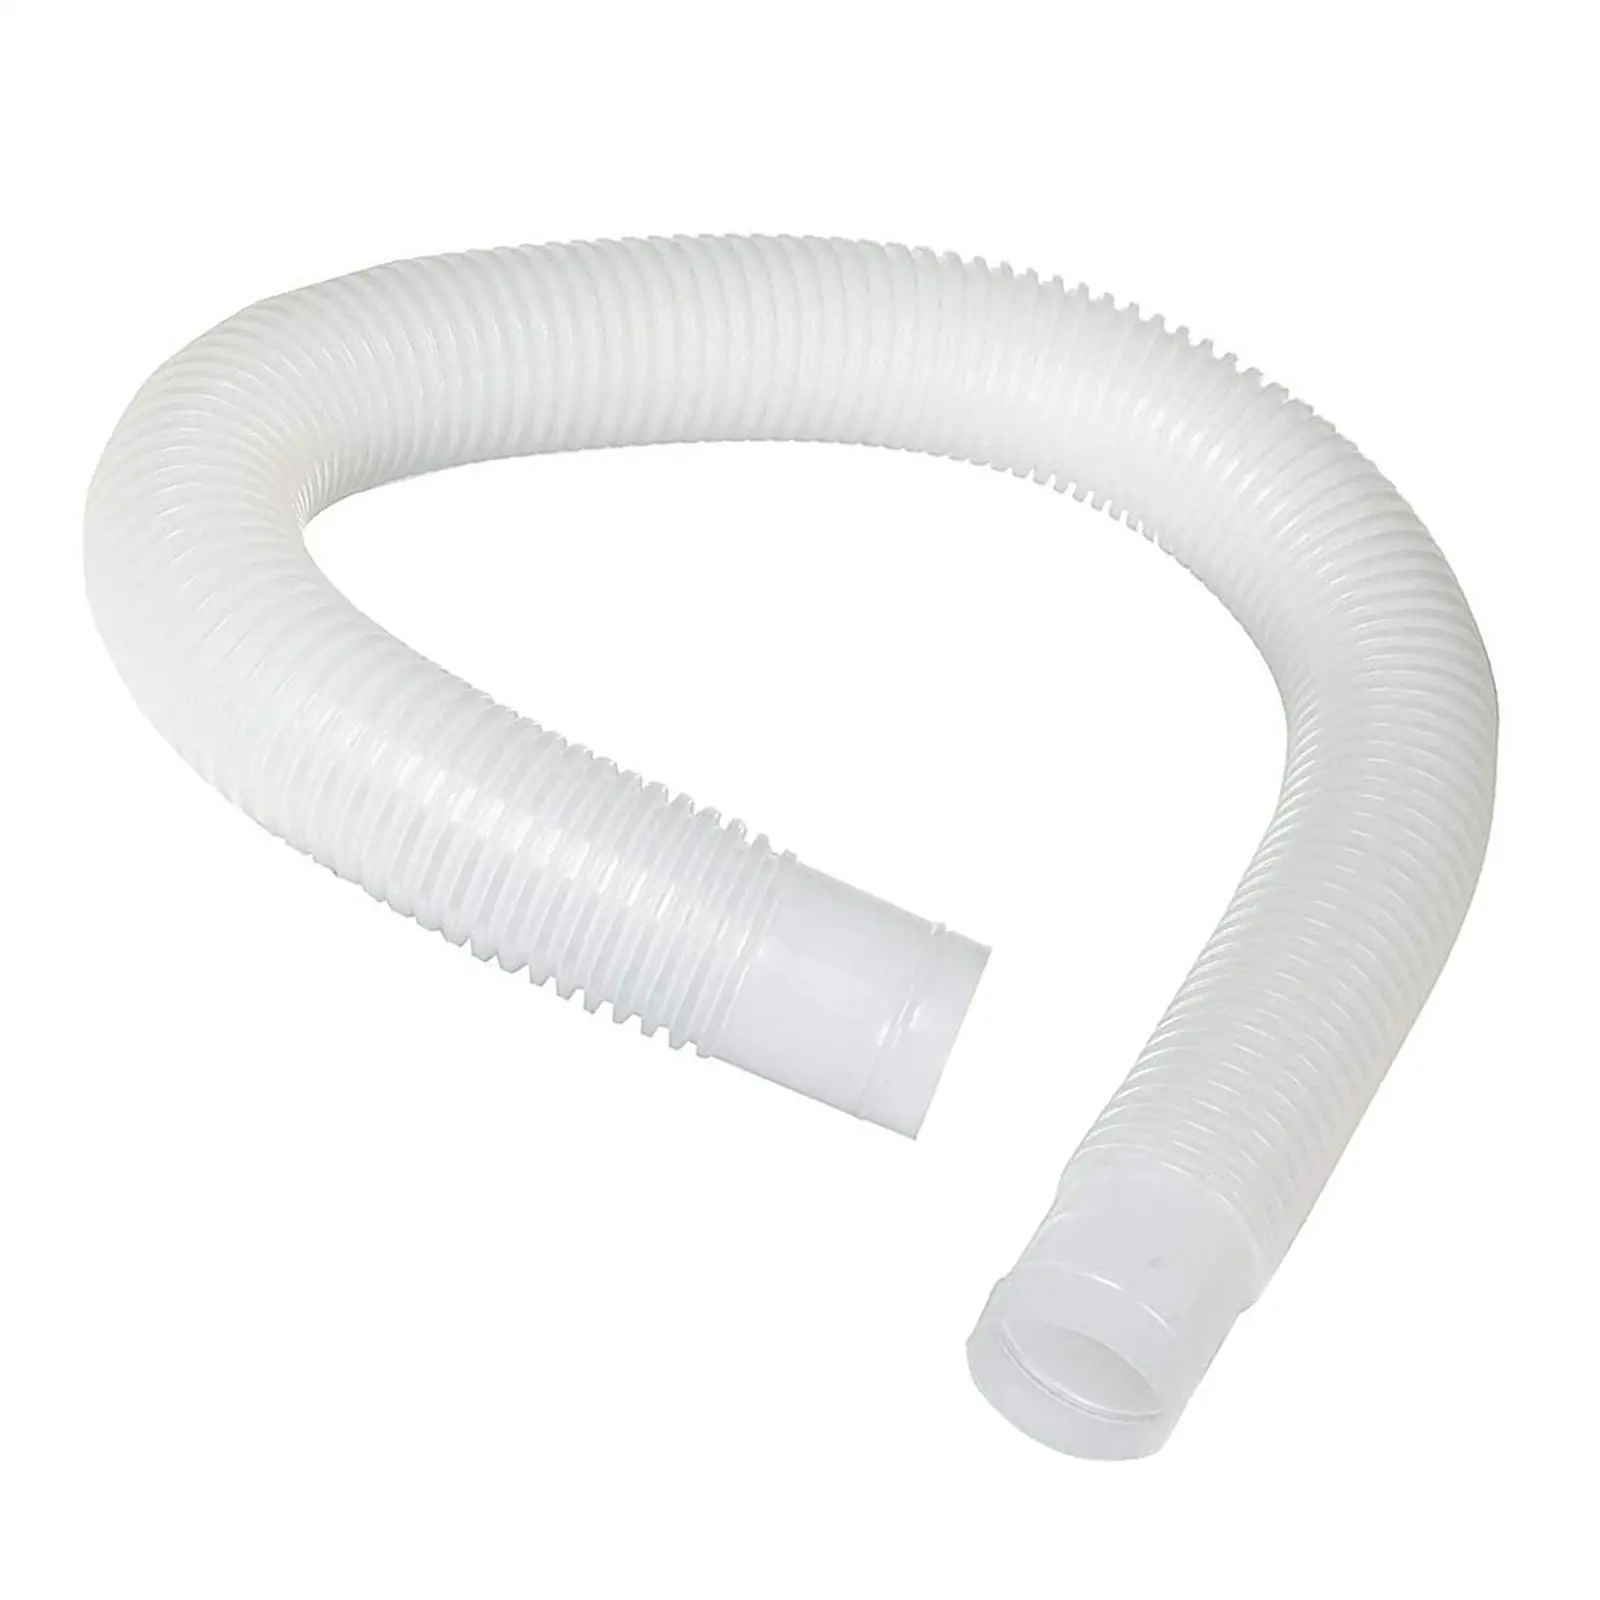 Pools Skimmer Hose Flexible Parts Heavy Duty Strainer Replacement Hose Pool Filter Connection Hose Pool Vacuum Pump Skimmer Hose